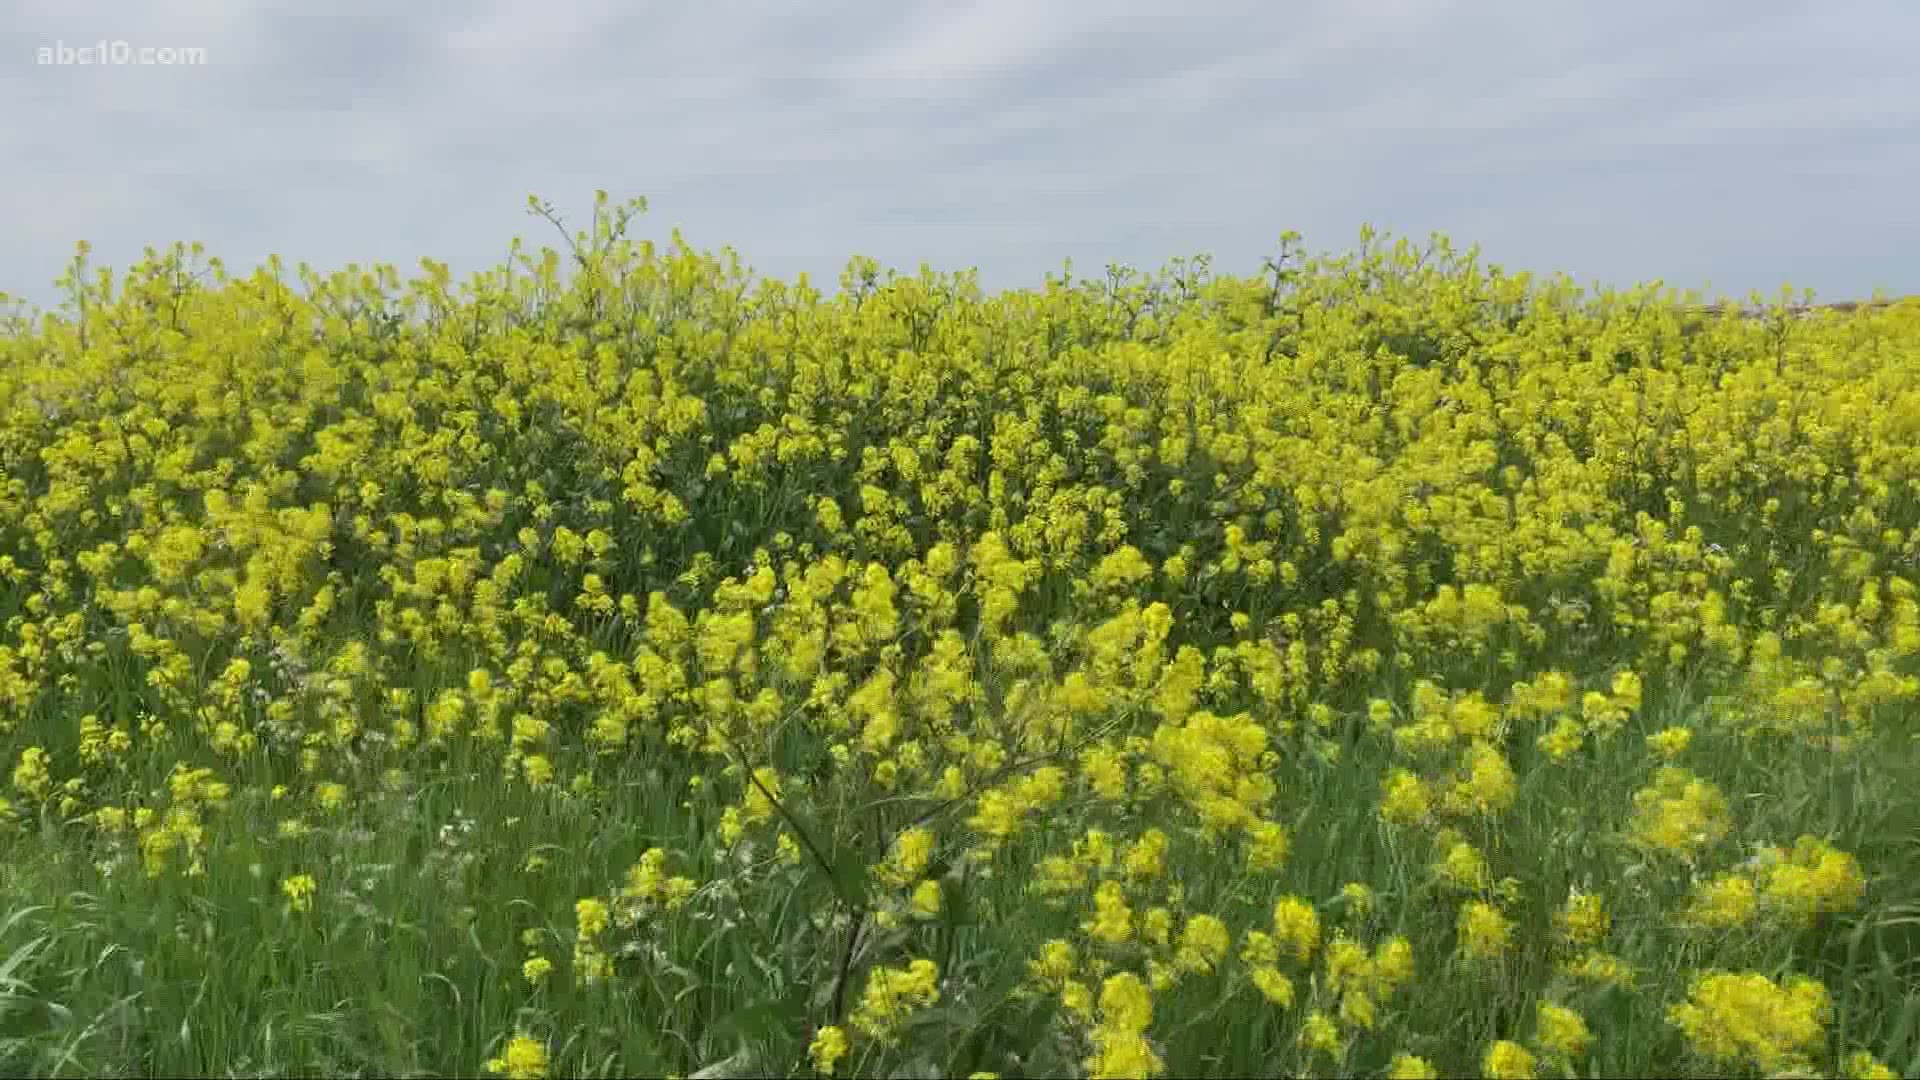 Pollen in those mustard weeds and other plants across Northern California are going to kick up with the wind this week. Here's what you can do for your allergies.